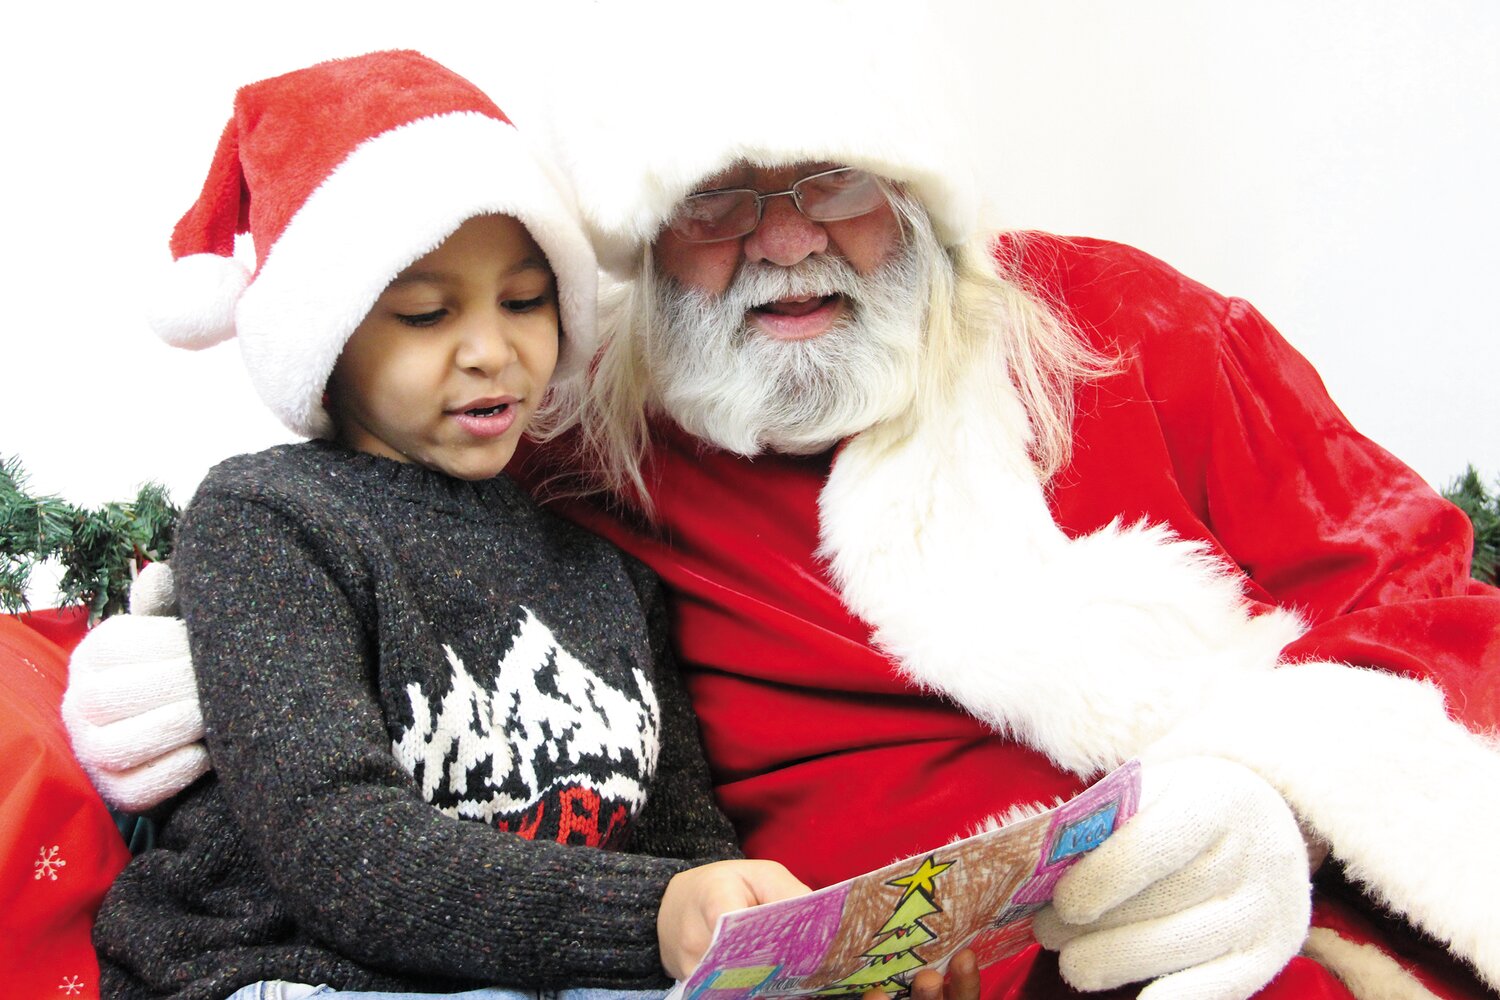 FIRST IN LINE: Makai Douthit brought a letter and a gift for Santa when he visited the Beacon last Saturday, And that’s Rep. David Bennett…and the beard is for real. (Warwick Beacon photo)